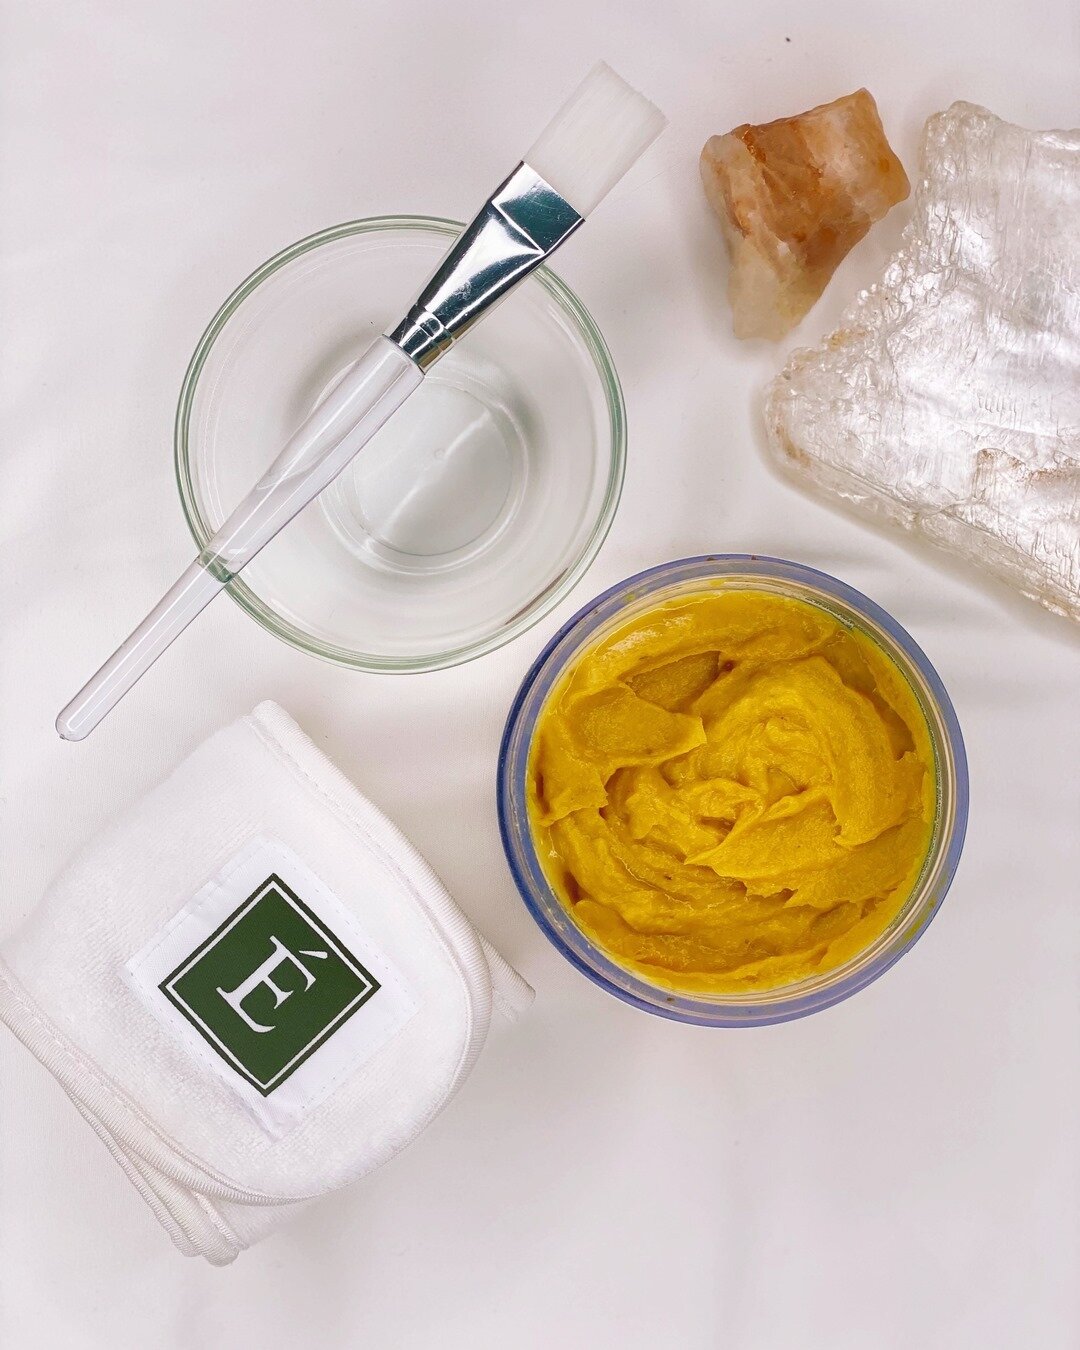 ✨SUPER SKIN FOOD: PUMPKIN 🎃⠀⠀⠀⠀⠀⠀⠀⠀⠀
⠀⠀⠀⠀⠀⠀⠀⠀⠀
My FAV Fall treatment by @eminenceorganics has returned to my backbar! 🙌  I enjoy using this Pumpkin Enzyme 20% Glycolic Peel to accelerate the exfoliation process for my clients! ⠀⠀⠀⠀⠀⠀⠀⠀⠀
⠀⠀⠀⠀⠀⠀⠀⠀⠀
T